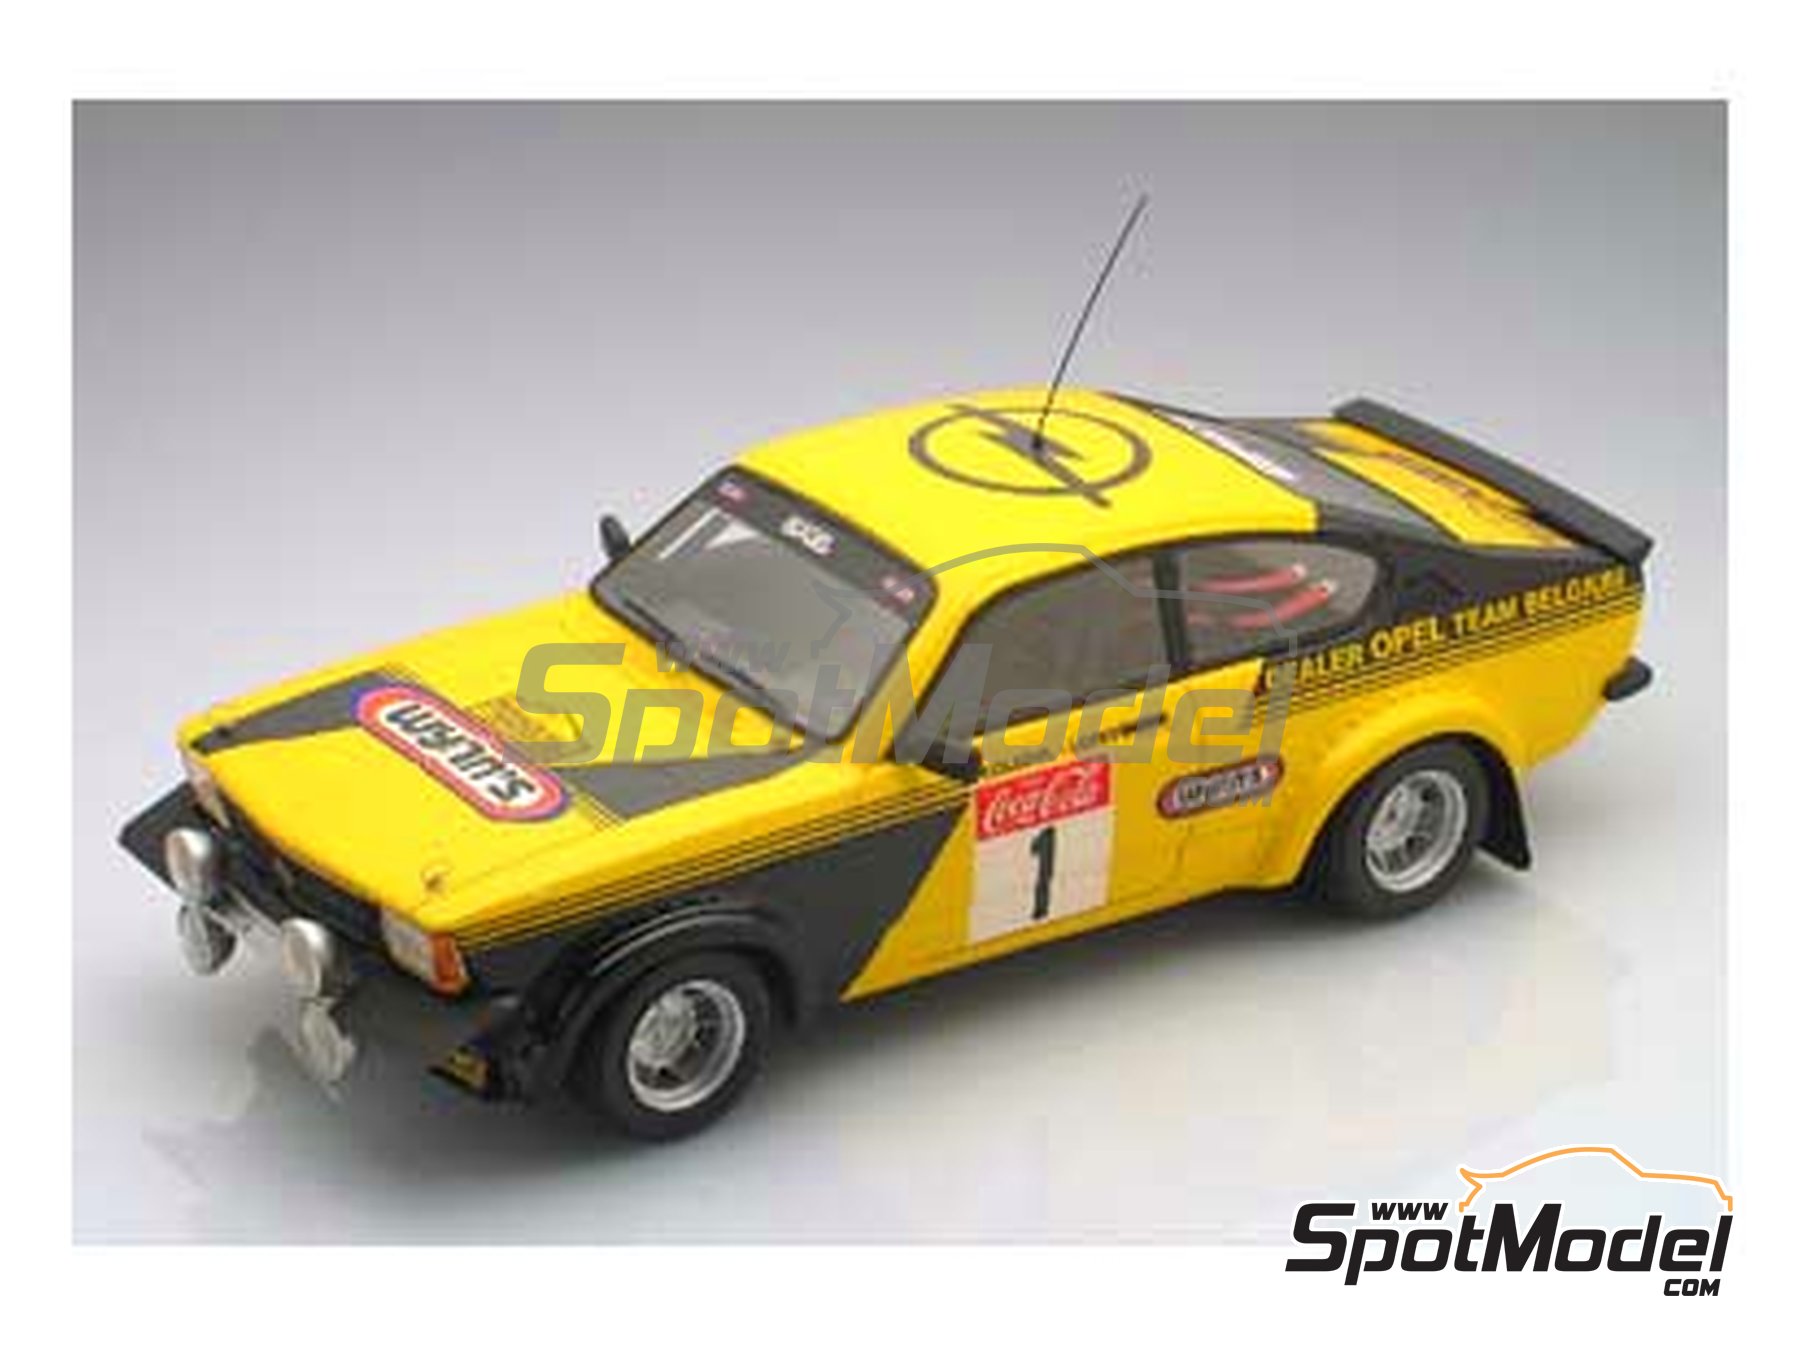 Opel Kadett GTE 2000 Group 2 Autoclub Excelsior Team sponsored by Wynn's -  Haspengouw Rally 1979. Car scale model kit in 1/24 scale manufactured by Ar